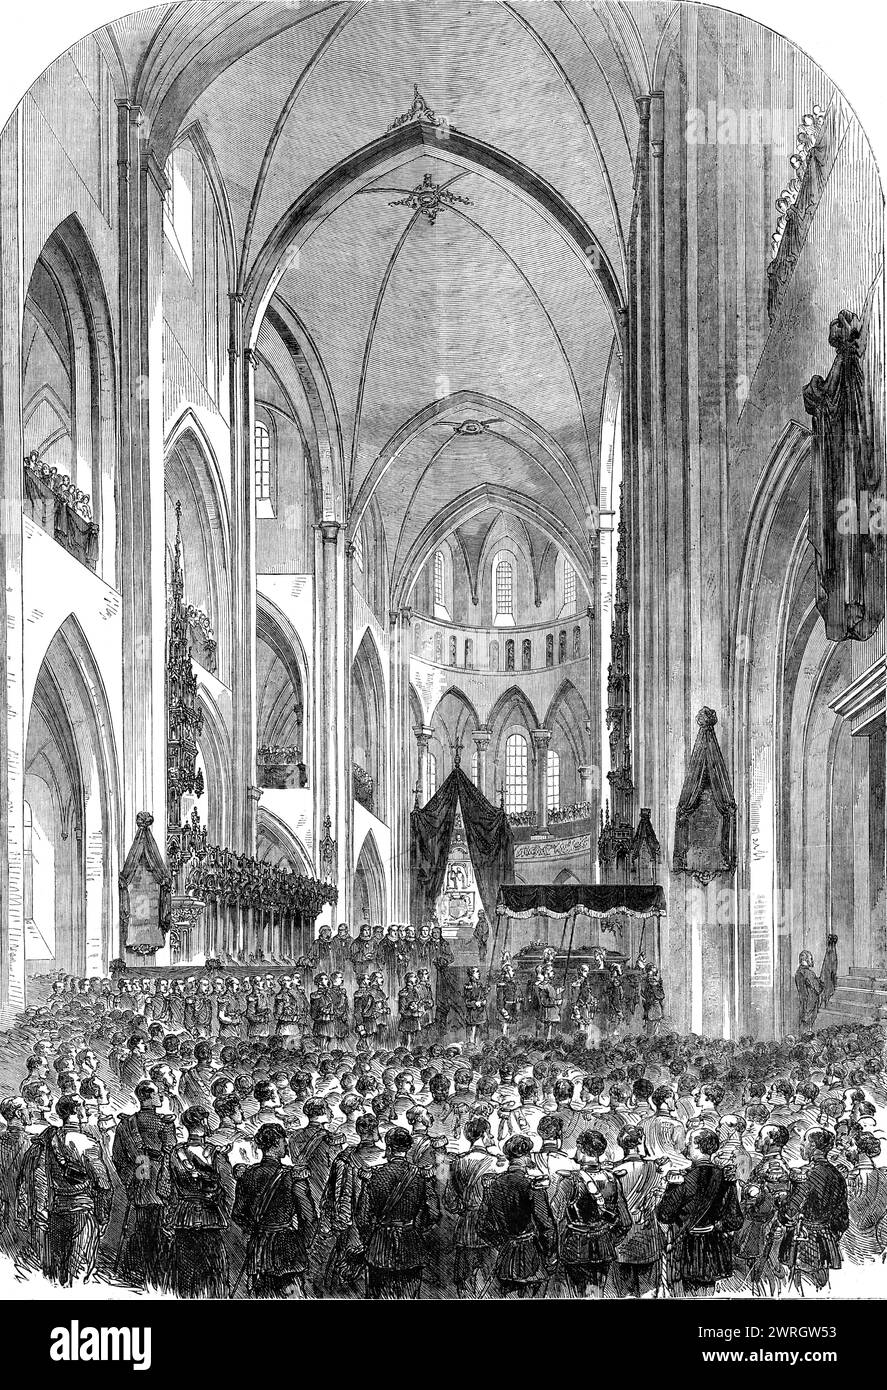 Burial of the late King of Denmark: the coffin being borne to the mausoleum at the close of the funeral service in Roeskilde Catheral, 1864. 'At half-past ten a.m., after the arrival of his Majesty King Christian and all the Royal Princes, the procession was marshalled, and proceeded on foot to the superb and venerable cathedral, and were met at the principal porch by the Bishop of Iceland and a numerous body of clergy, who preceded the procession to the high altar, below which the sarcophagus was placed. The cathedral, where the Diplomatic Body had previously assembled, was soon thronged, and Stock Photo